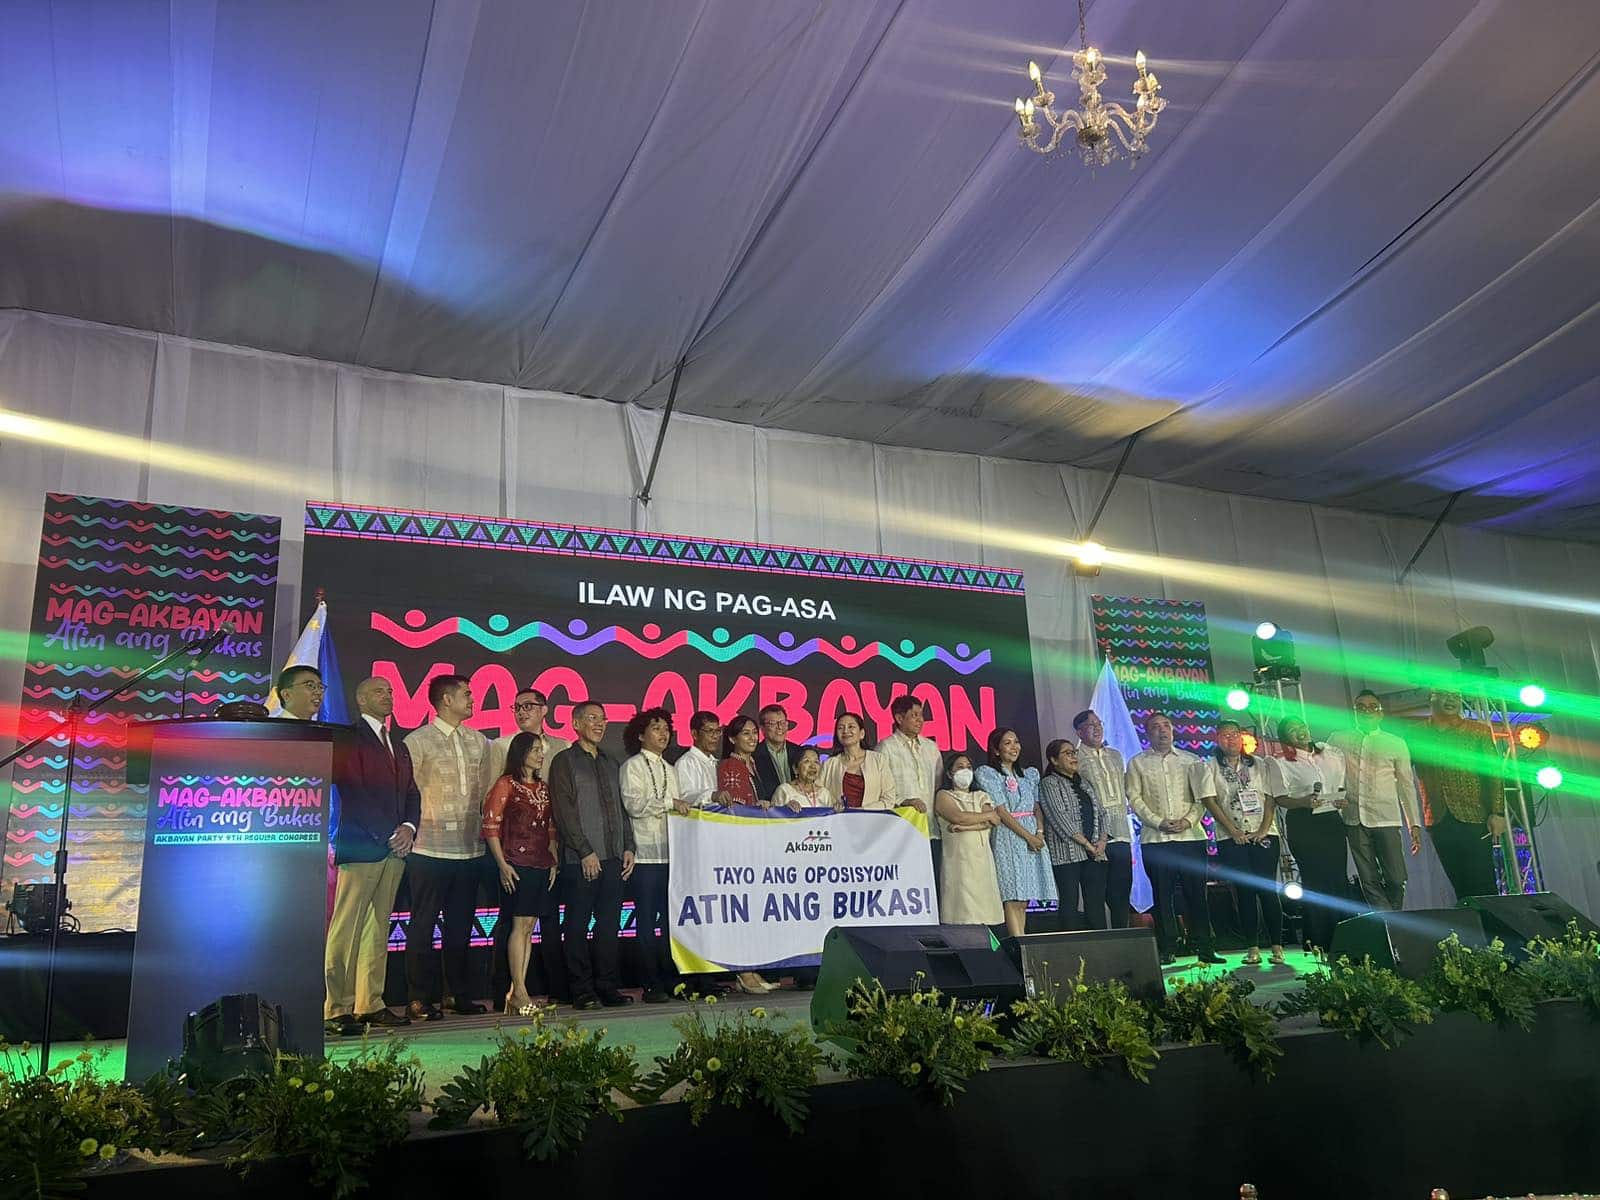 Akbayan Party held its 9th Regular Congress on Thursday, August 1, bringing hundreds of members across the country and opposition figures such as Senator Risa Hontiveros, former senator Kiko Pangilinan, human rights lawyer Chel Diokno and former Commission on Human Rights Chairperson Etta Rosales. (INQUIRER.net/Dianne Sampang)